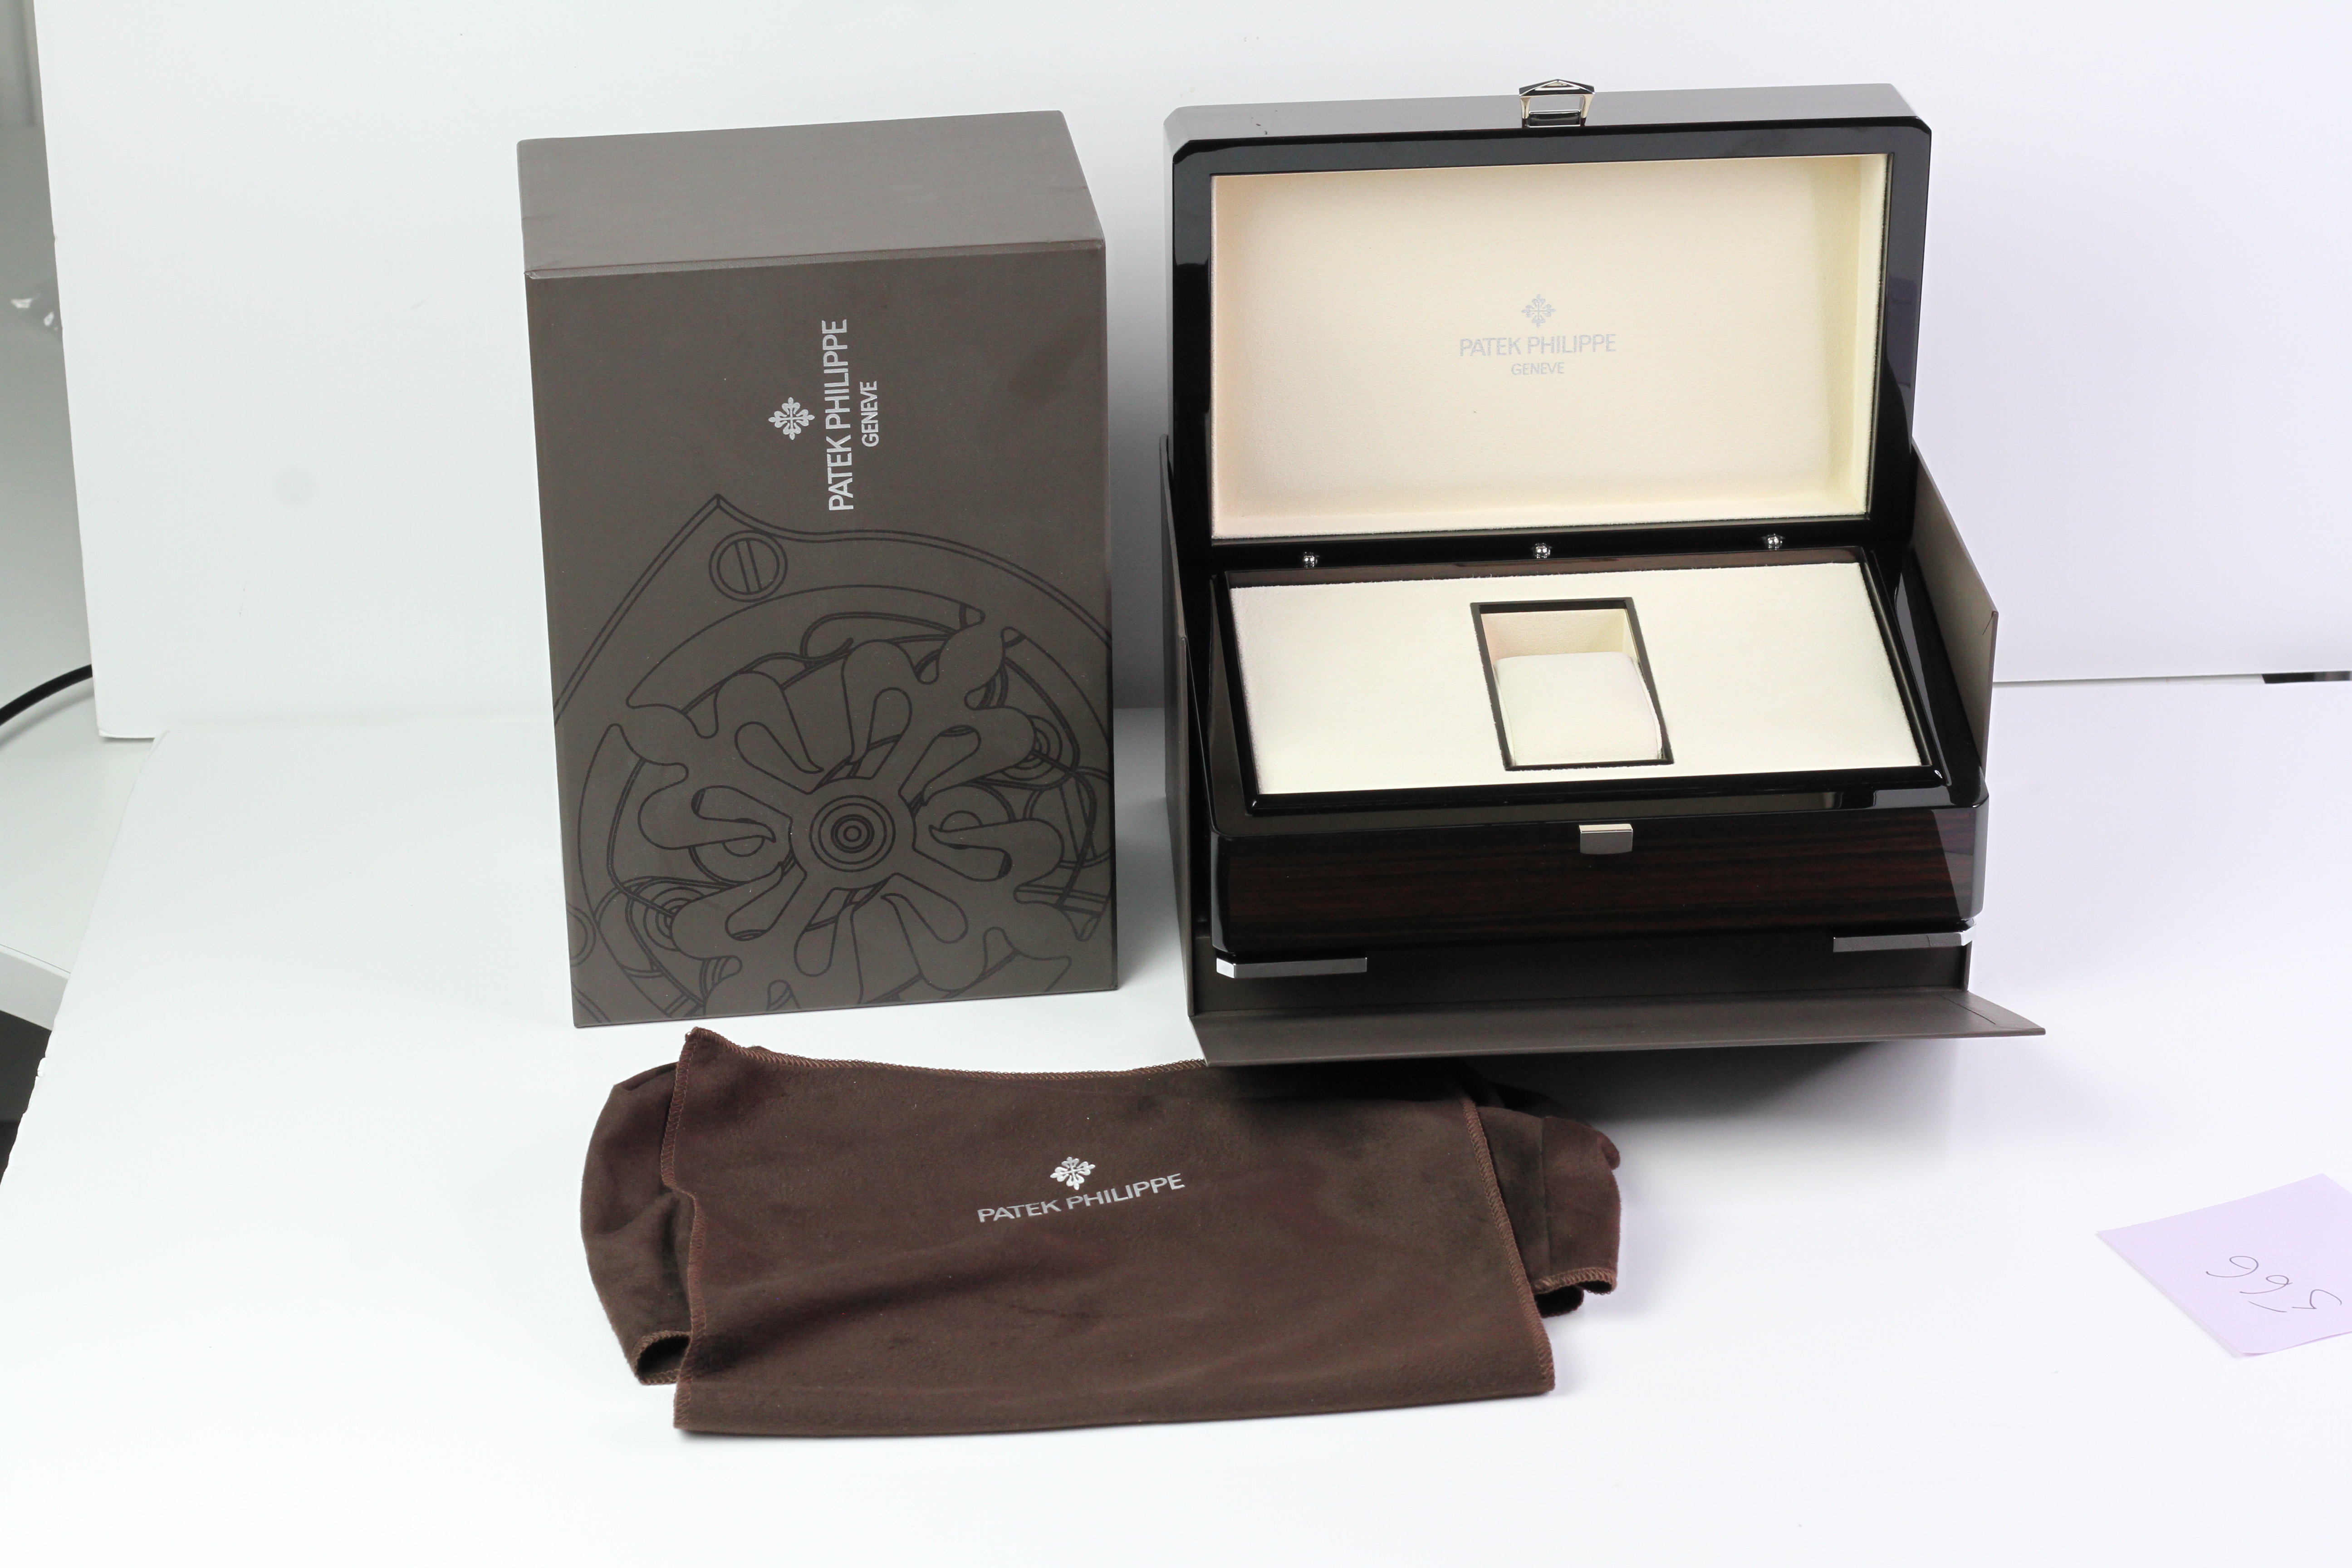 *To Be Sold Without Reserve* Modern Patek Philippe inner box and outer box